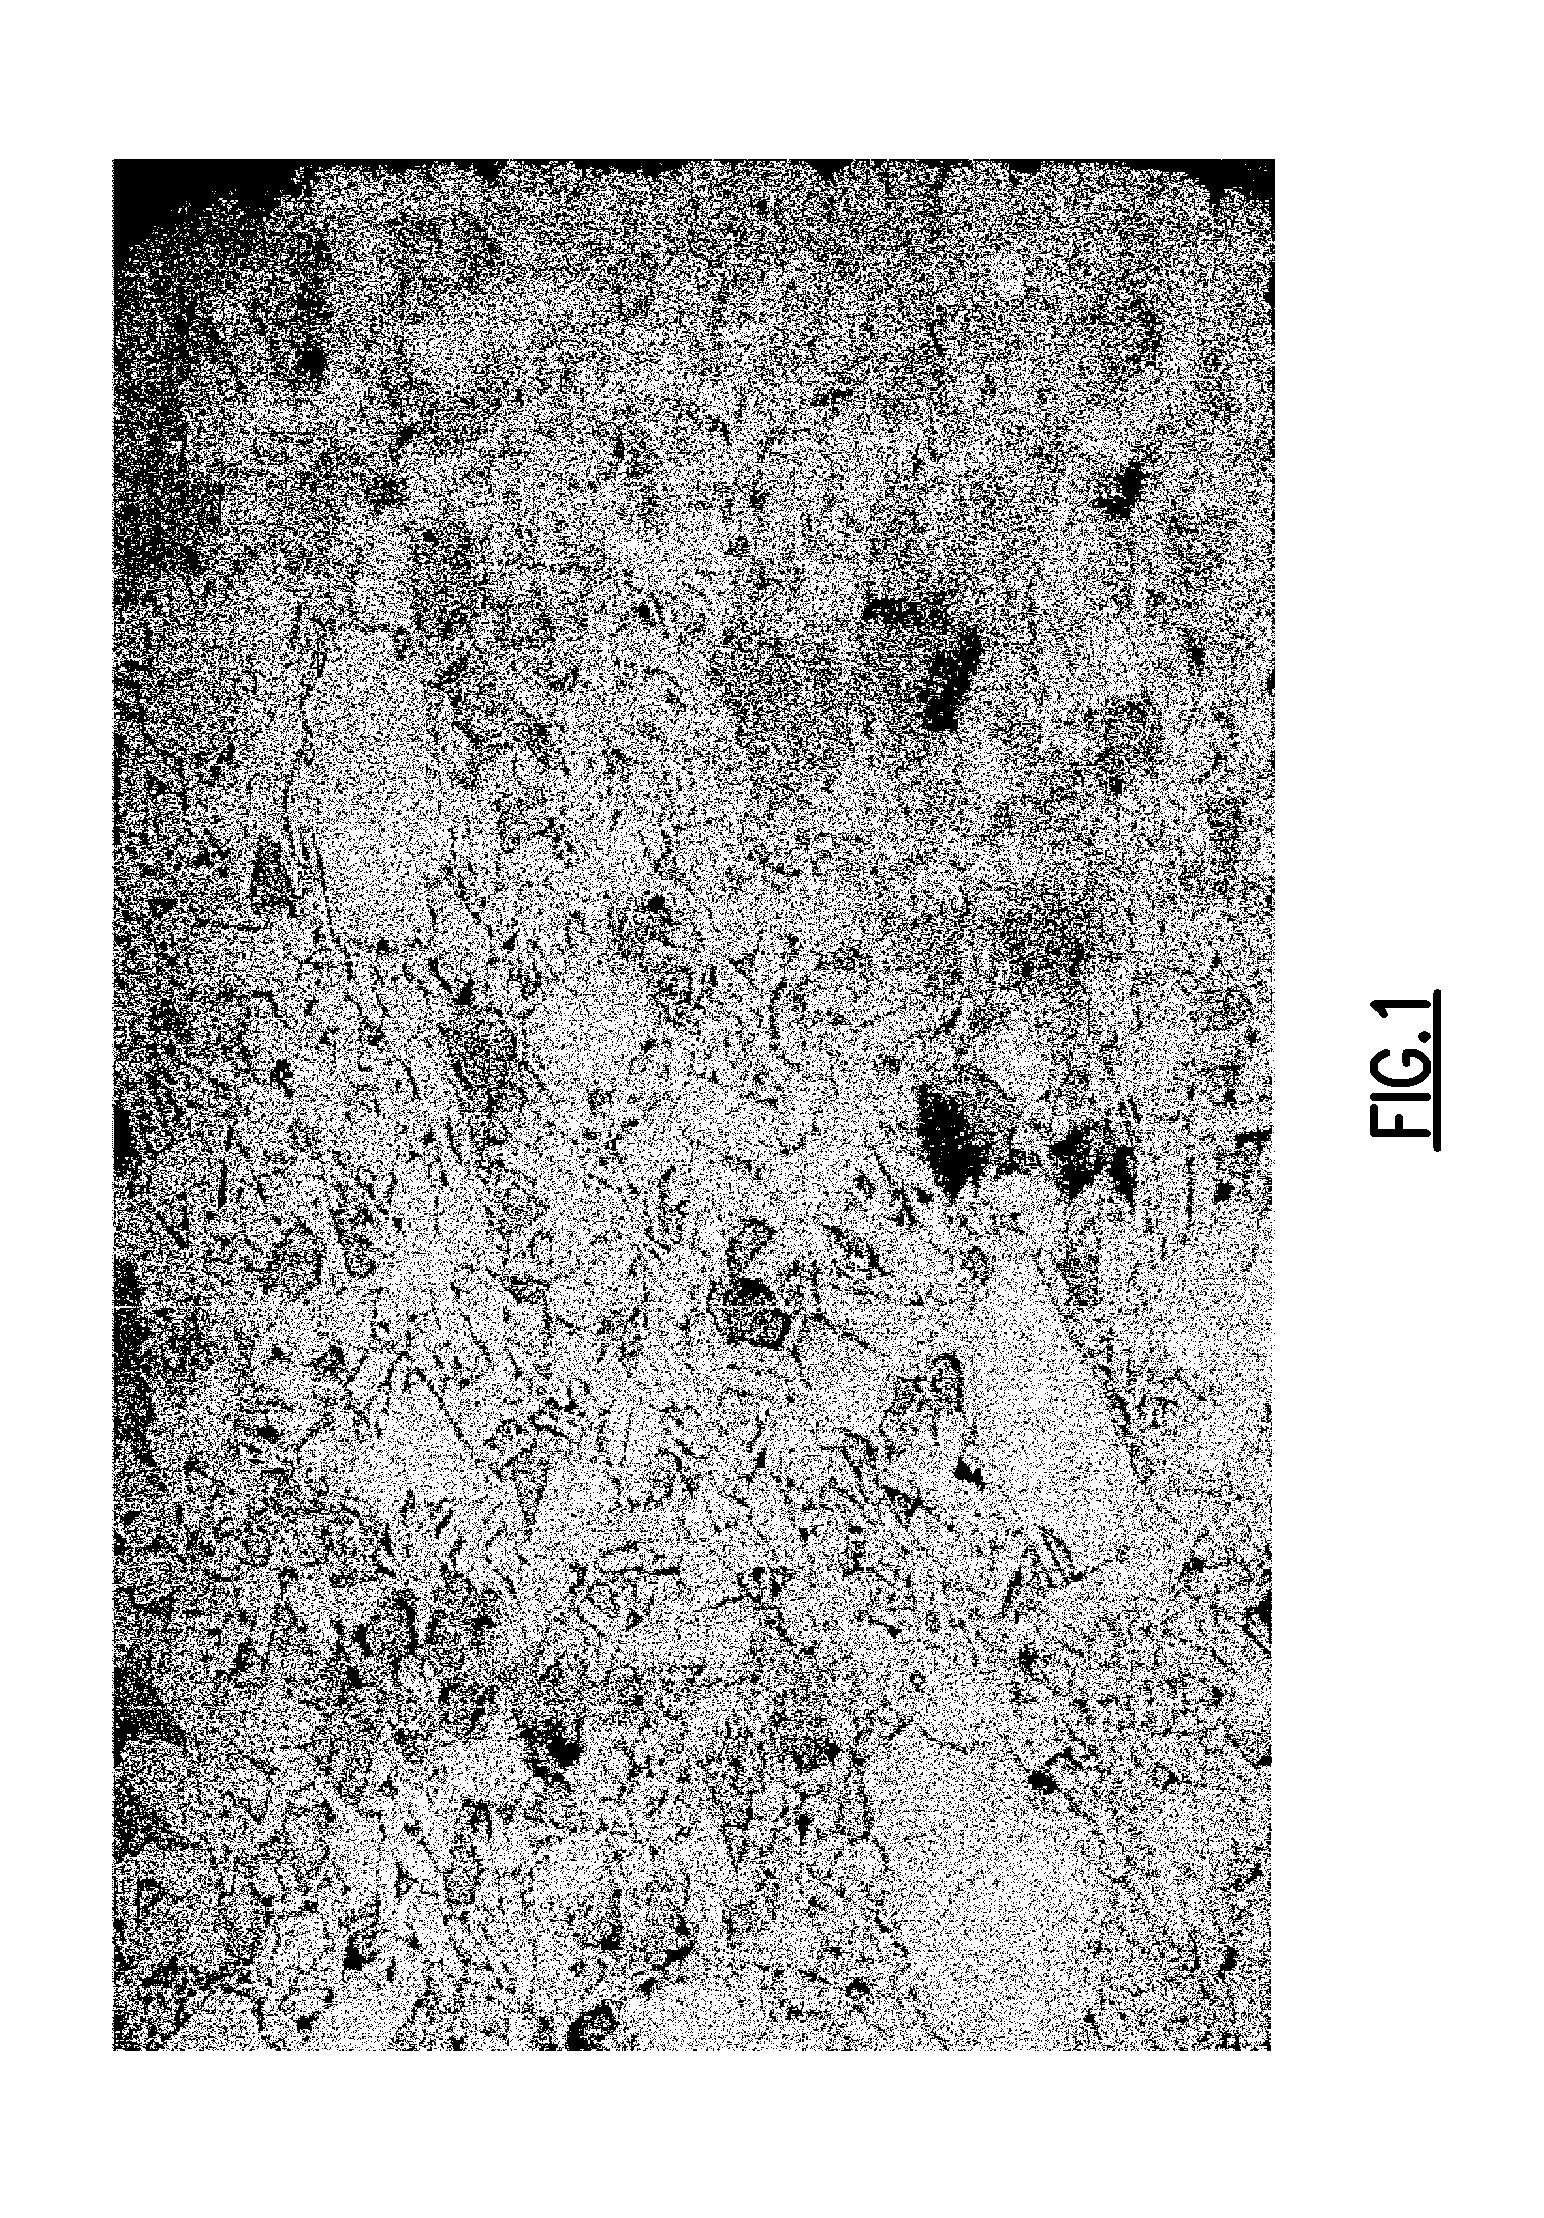 Specialty materials processing techniques for enhanced resonant frequency hexaferrite materials for antenna applications and other electronic devices